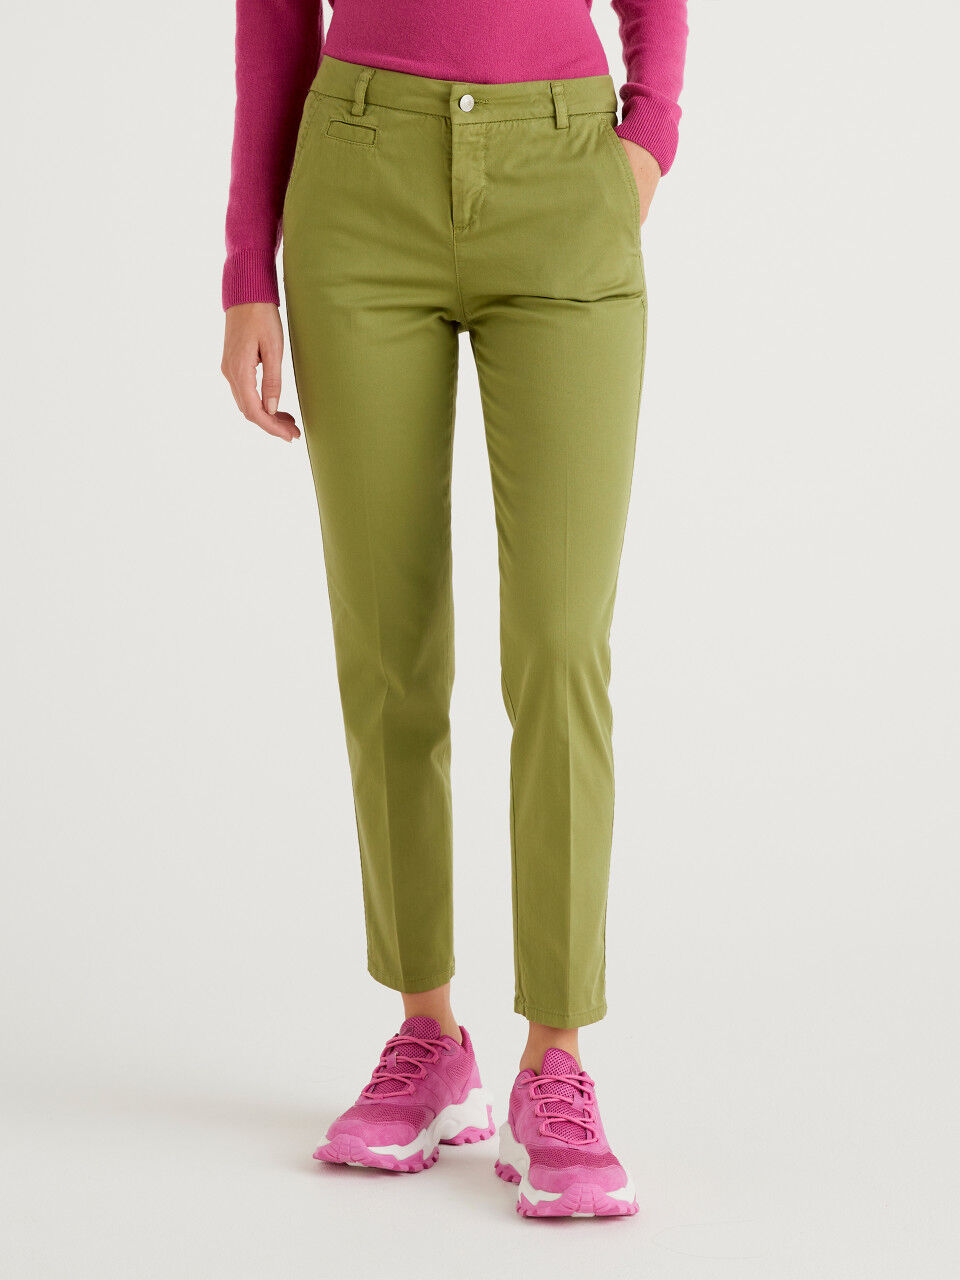 Coin Pocket Chino in Trousers | Vince